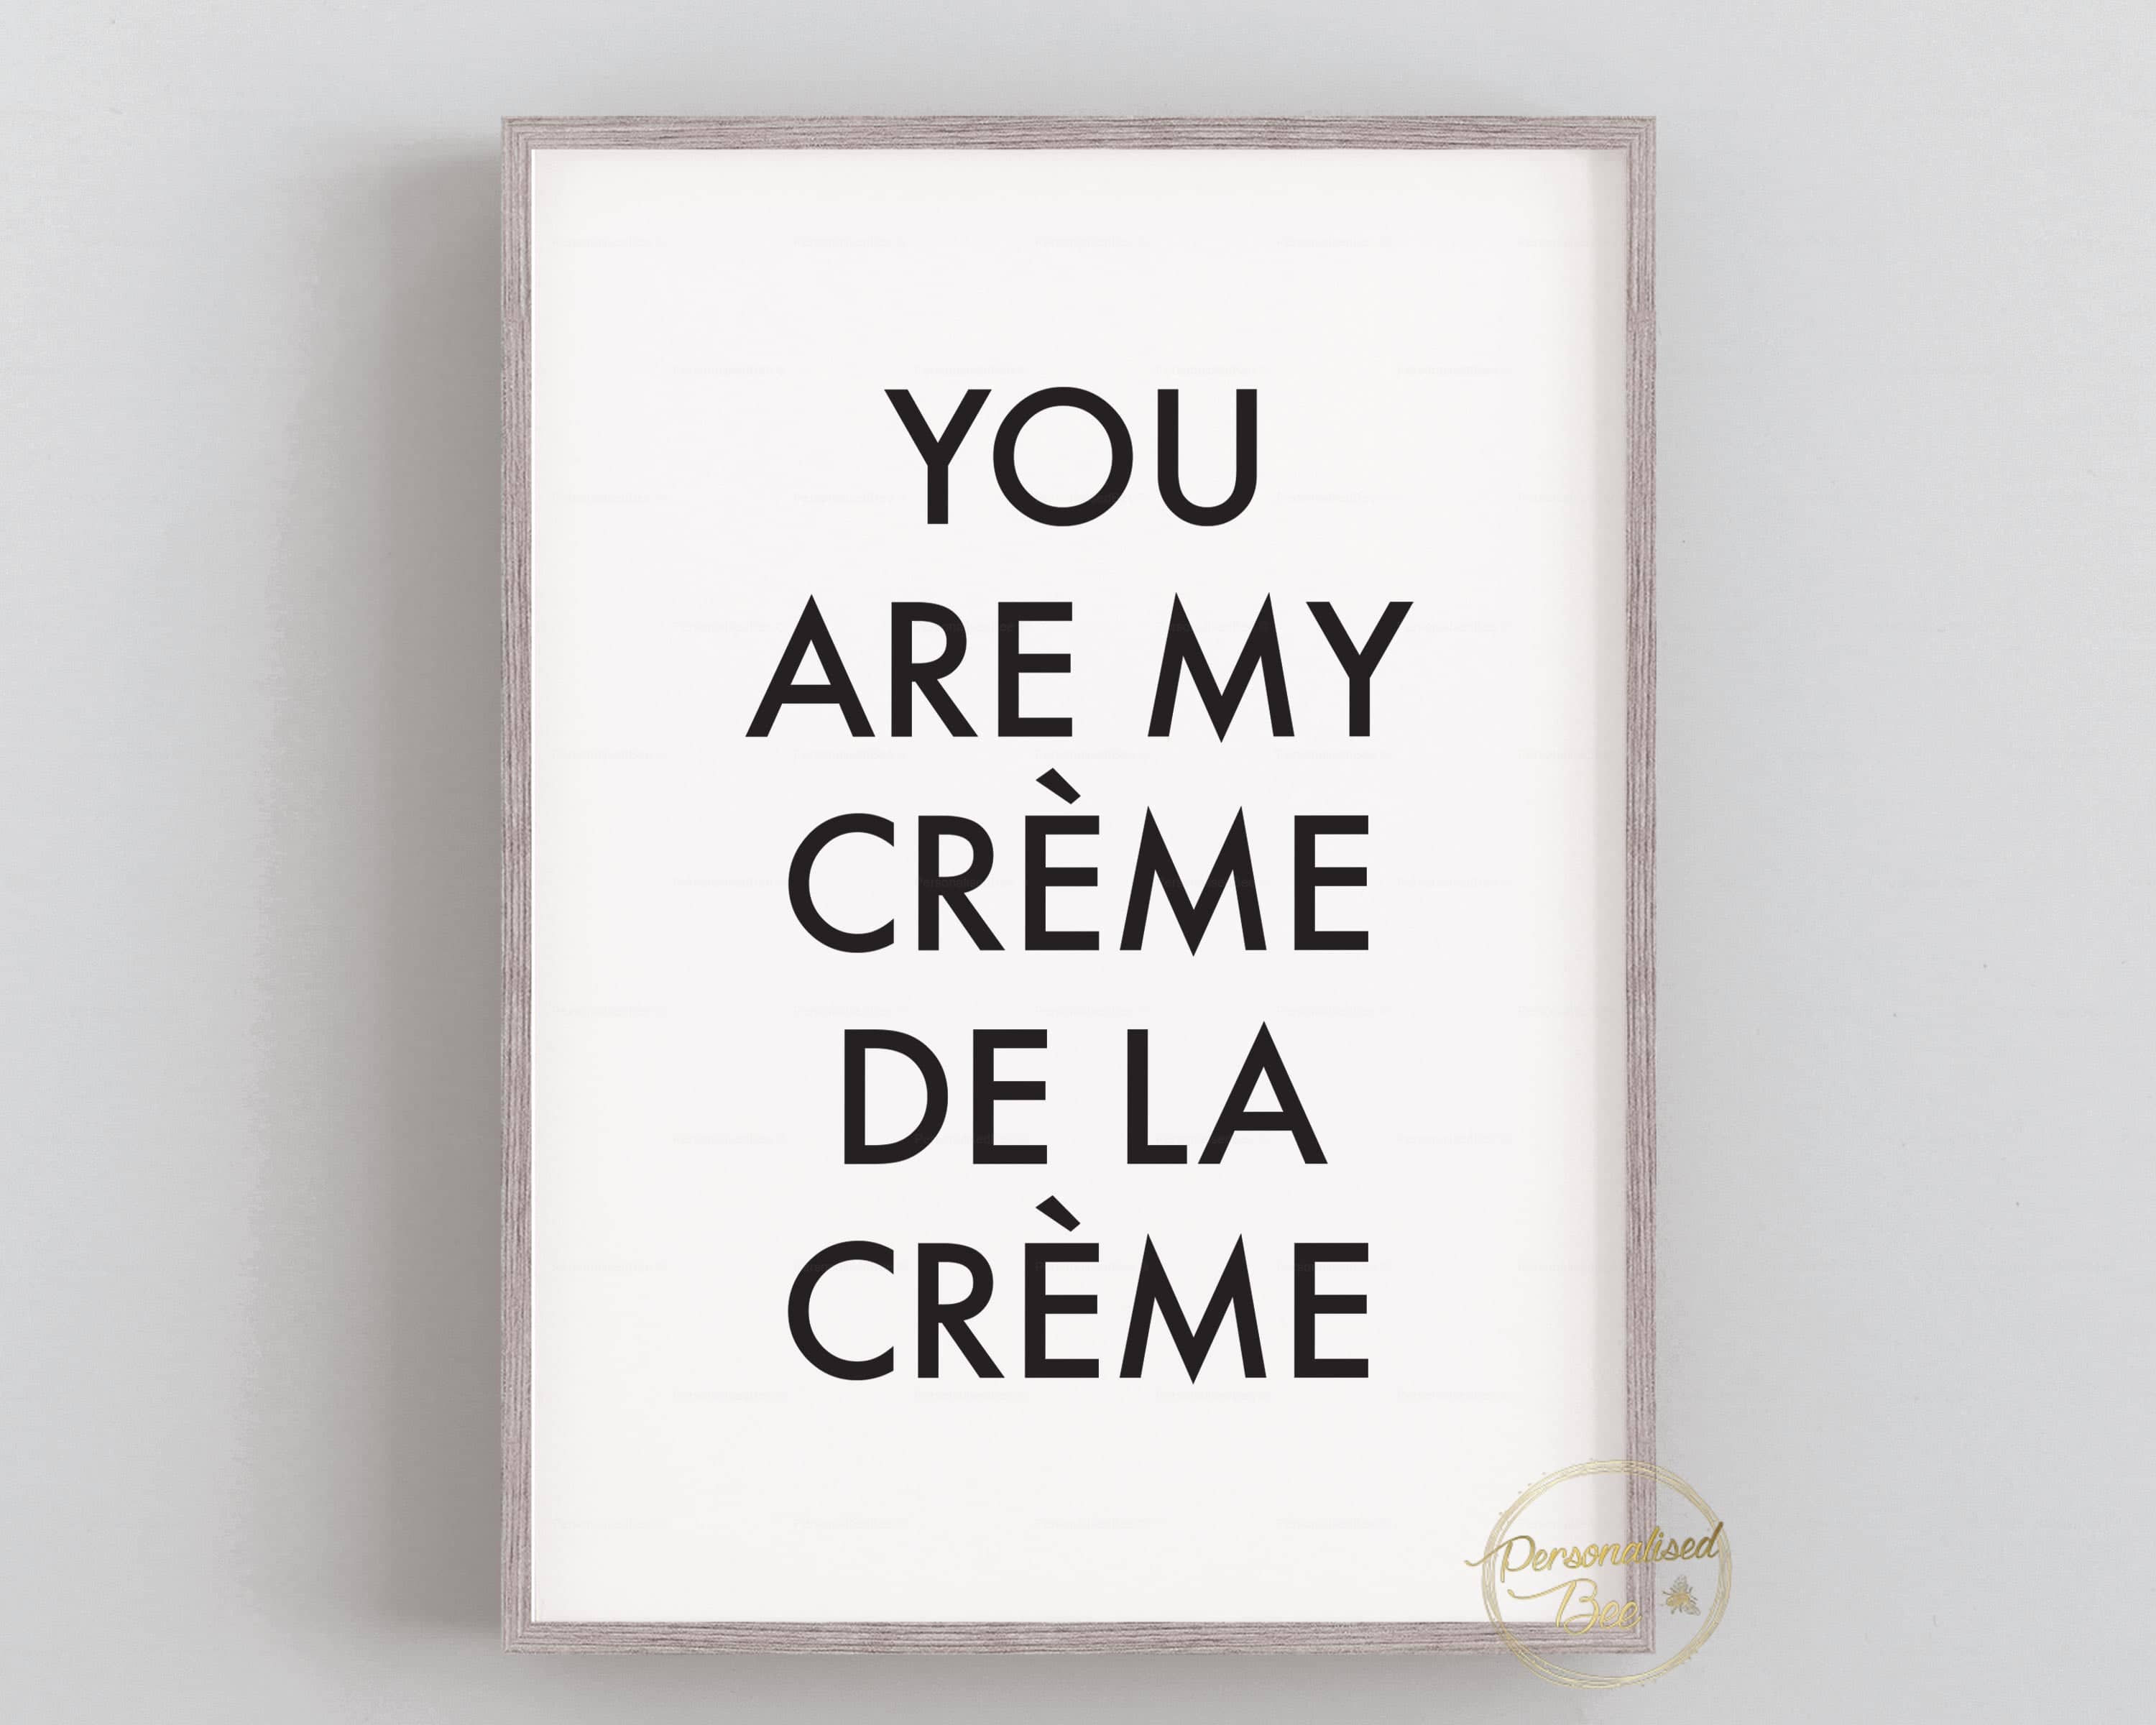 Typography Quote - You Are My Creme de la Creme - Wall Art Print.